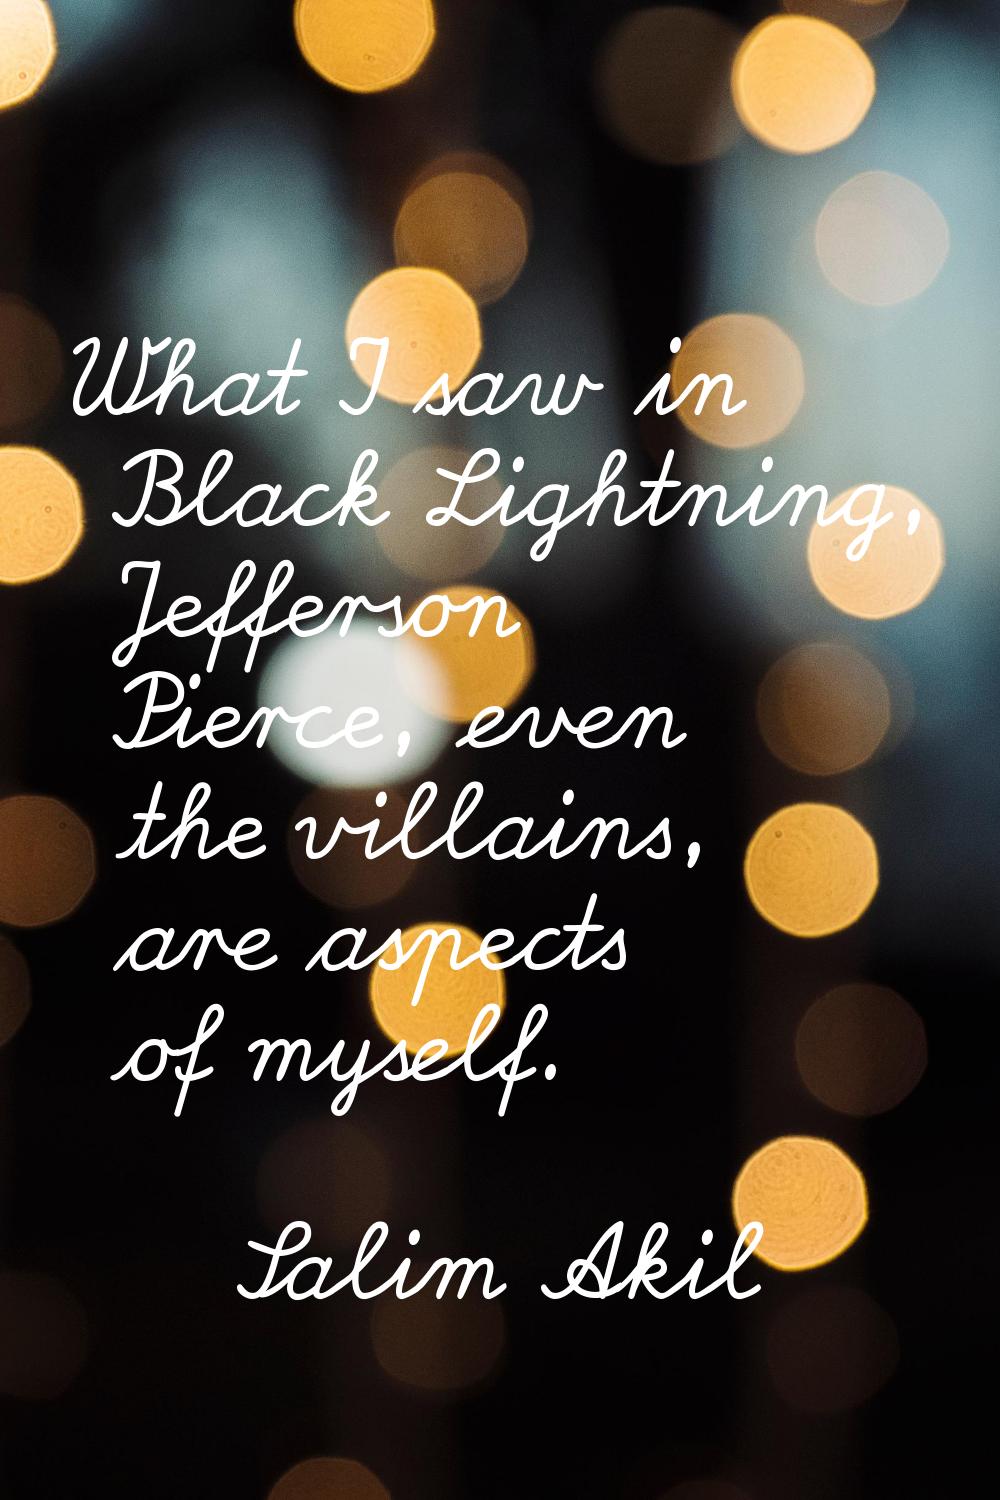 What I saw in Black Lightning, Jefferson Pierce, even the villains, are aspects of myself.